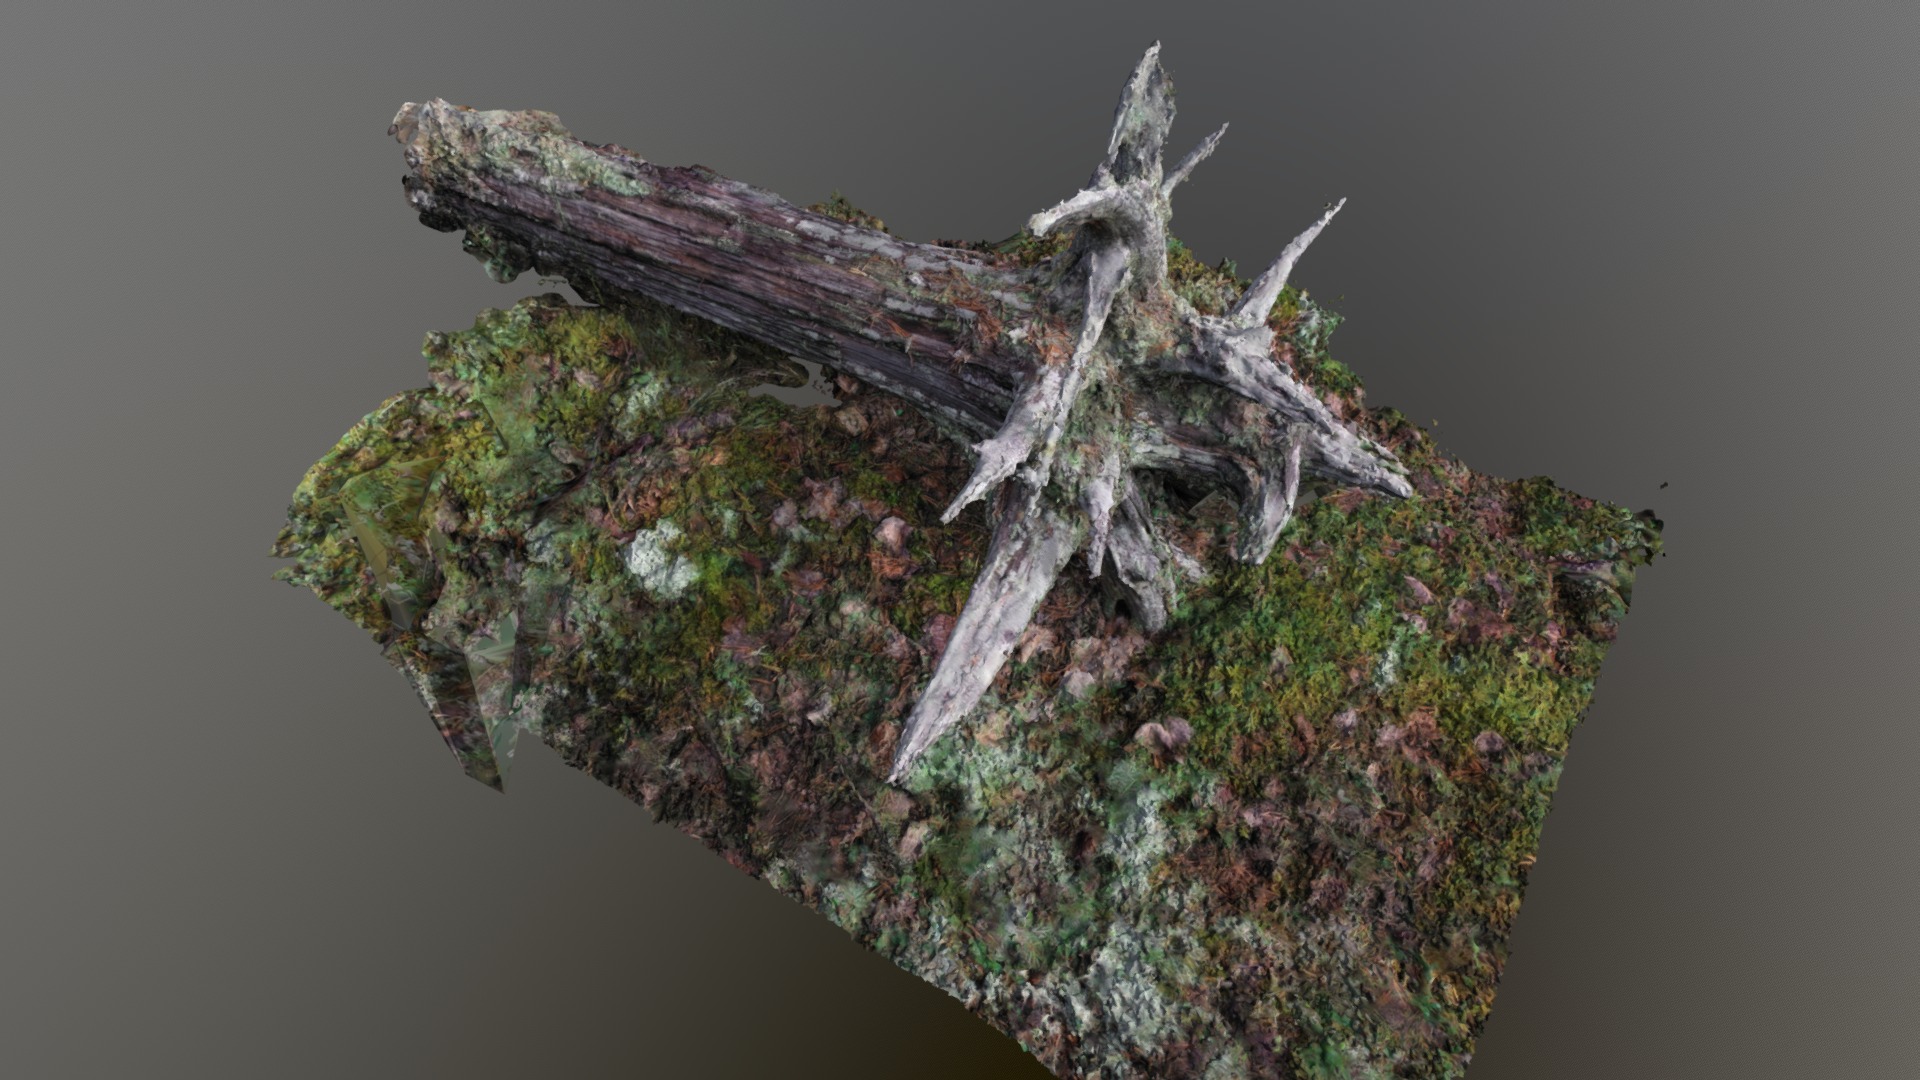 3D model Roots Of Tree - This is a 3D model of the Roots Of Tree. The 3D model is about a tree branch with moss growing on it.